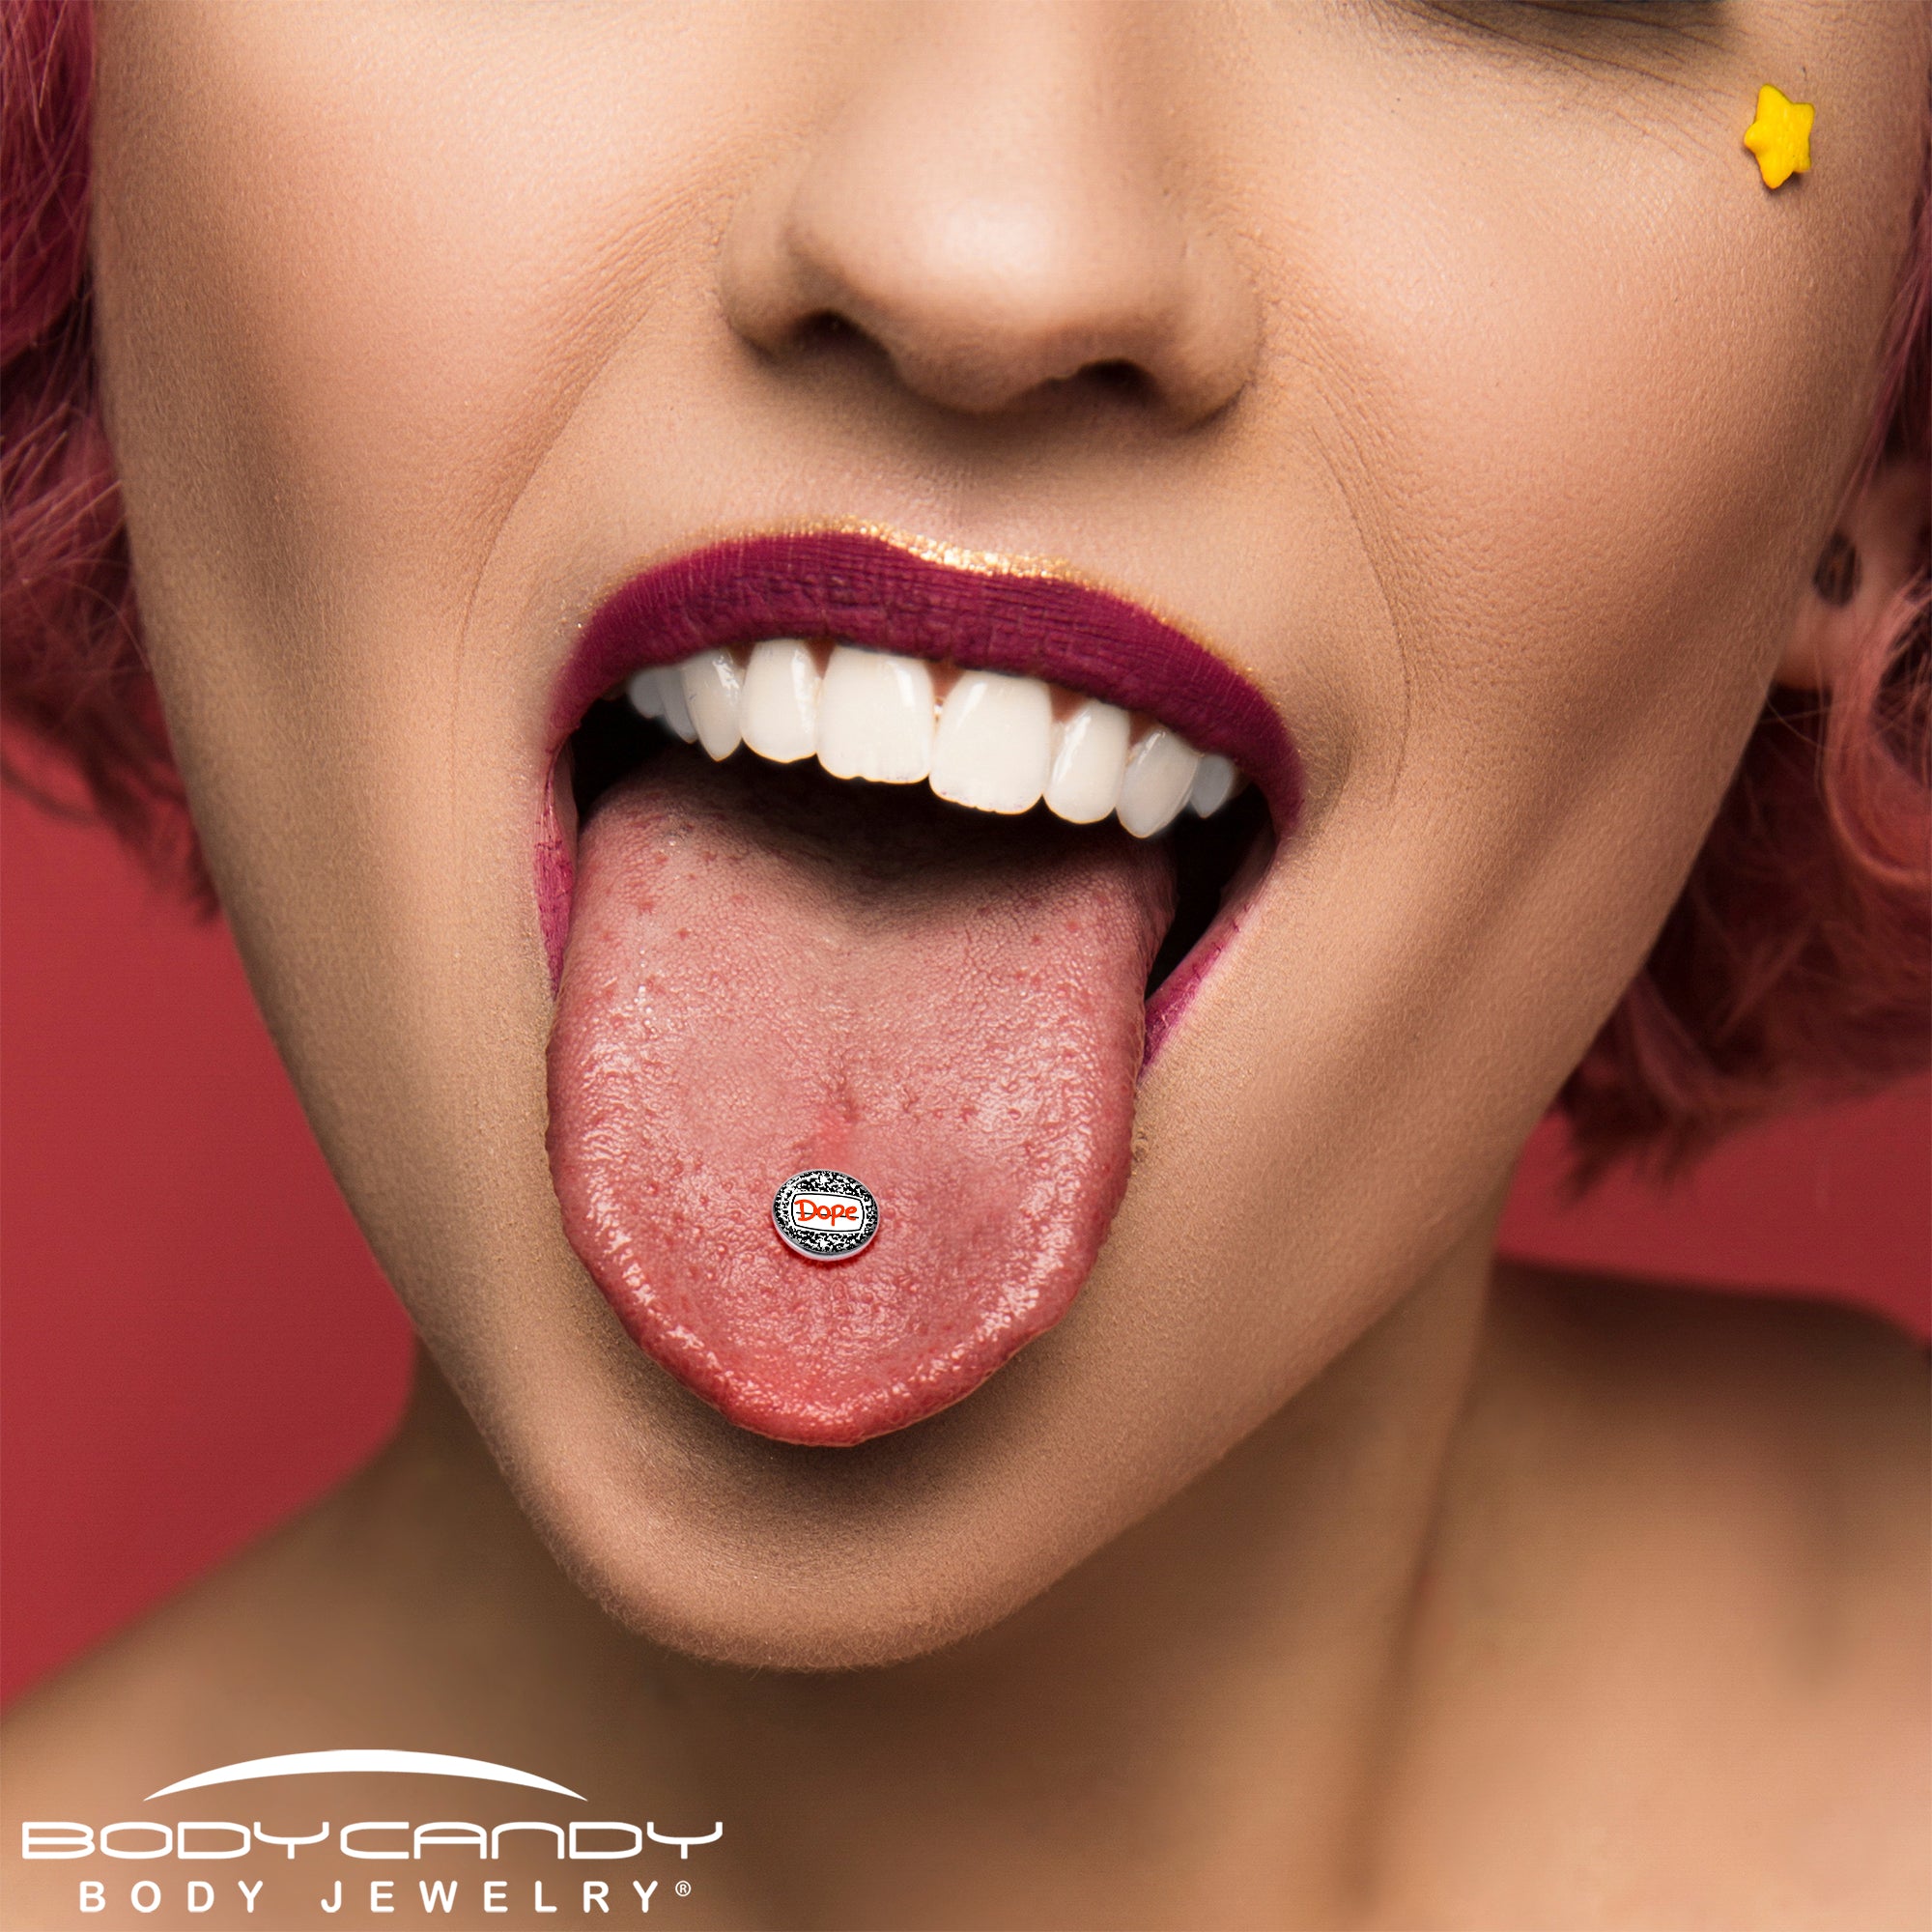 Dope Composition Notebook Barbell Tongue Ring